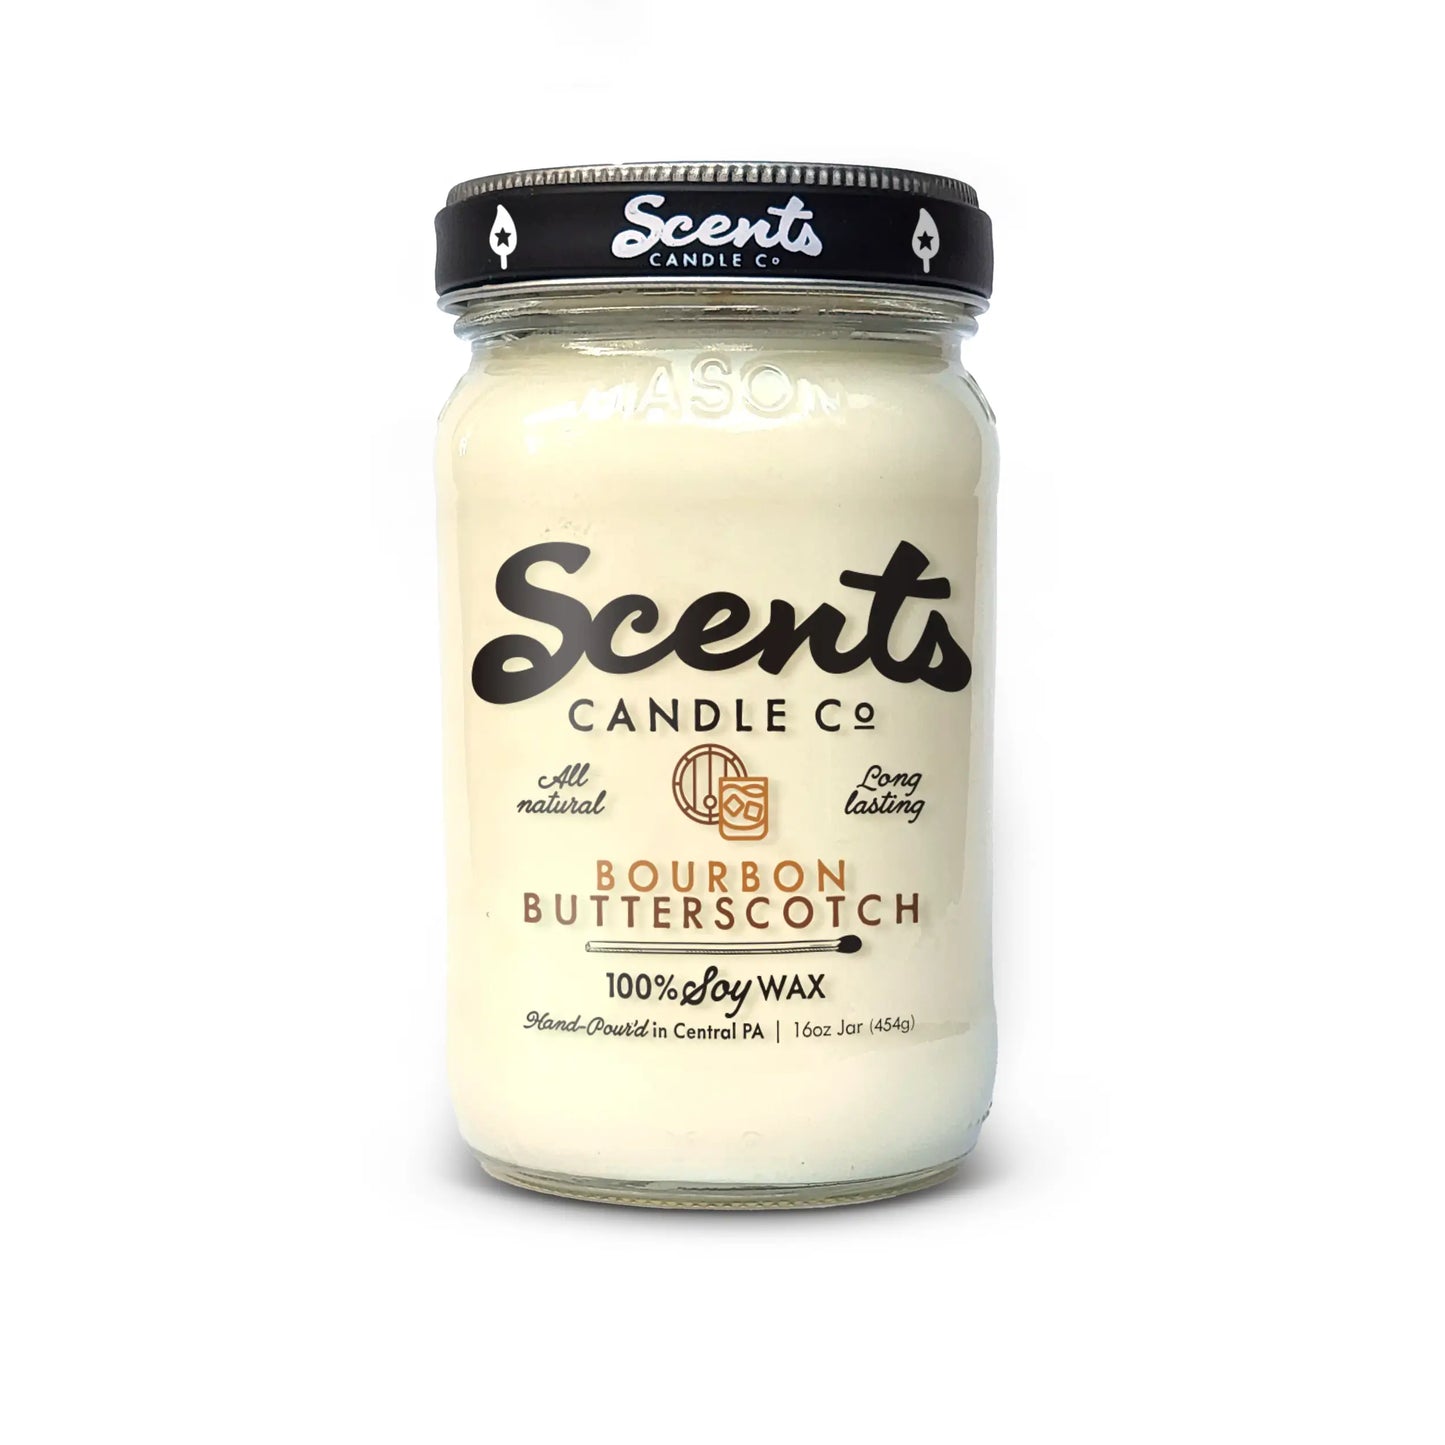 Scents Candle Co. Bourbon Butterscotch Soy Wax Candles